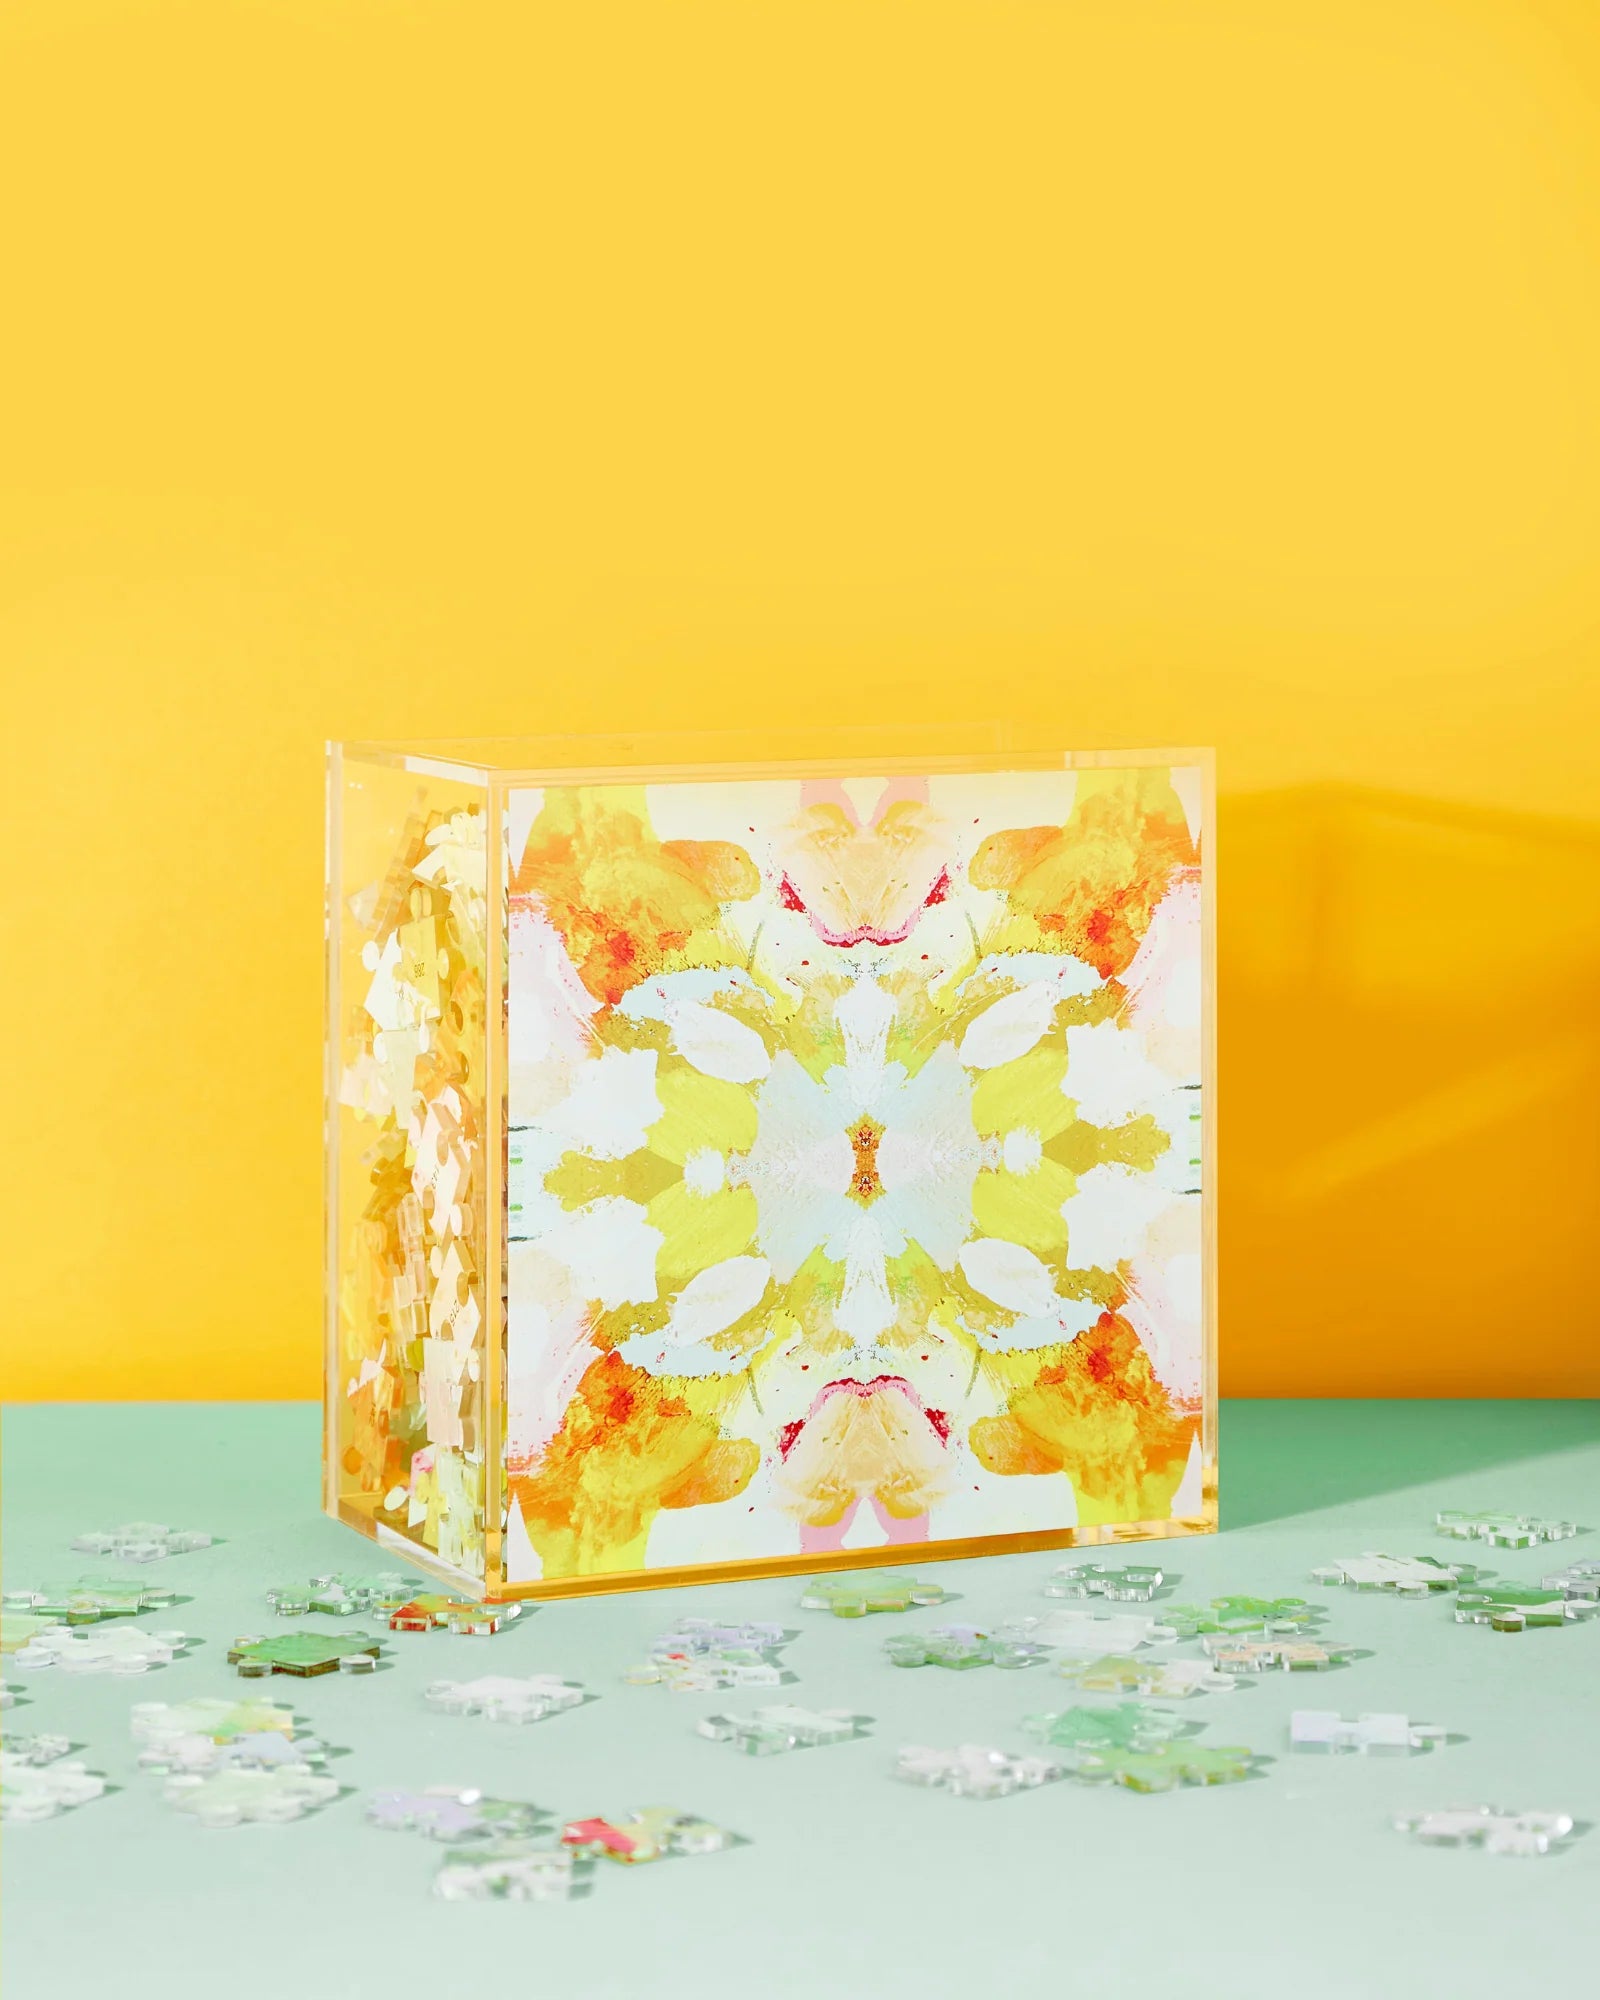 Acrylic Puzzle + Display | Tart By Taylor